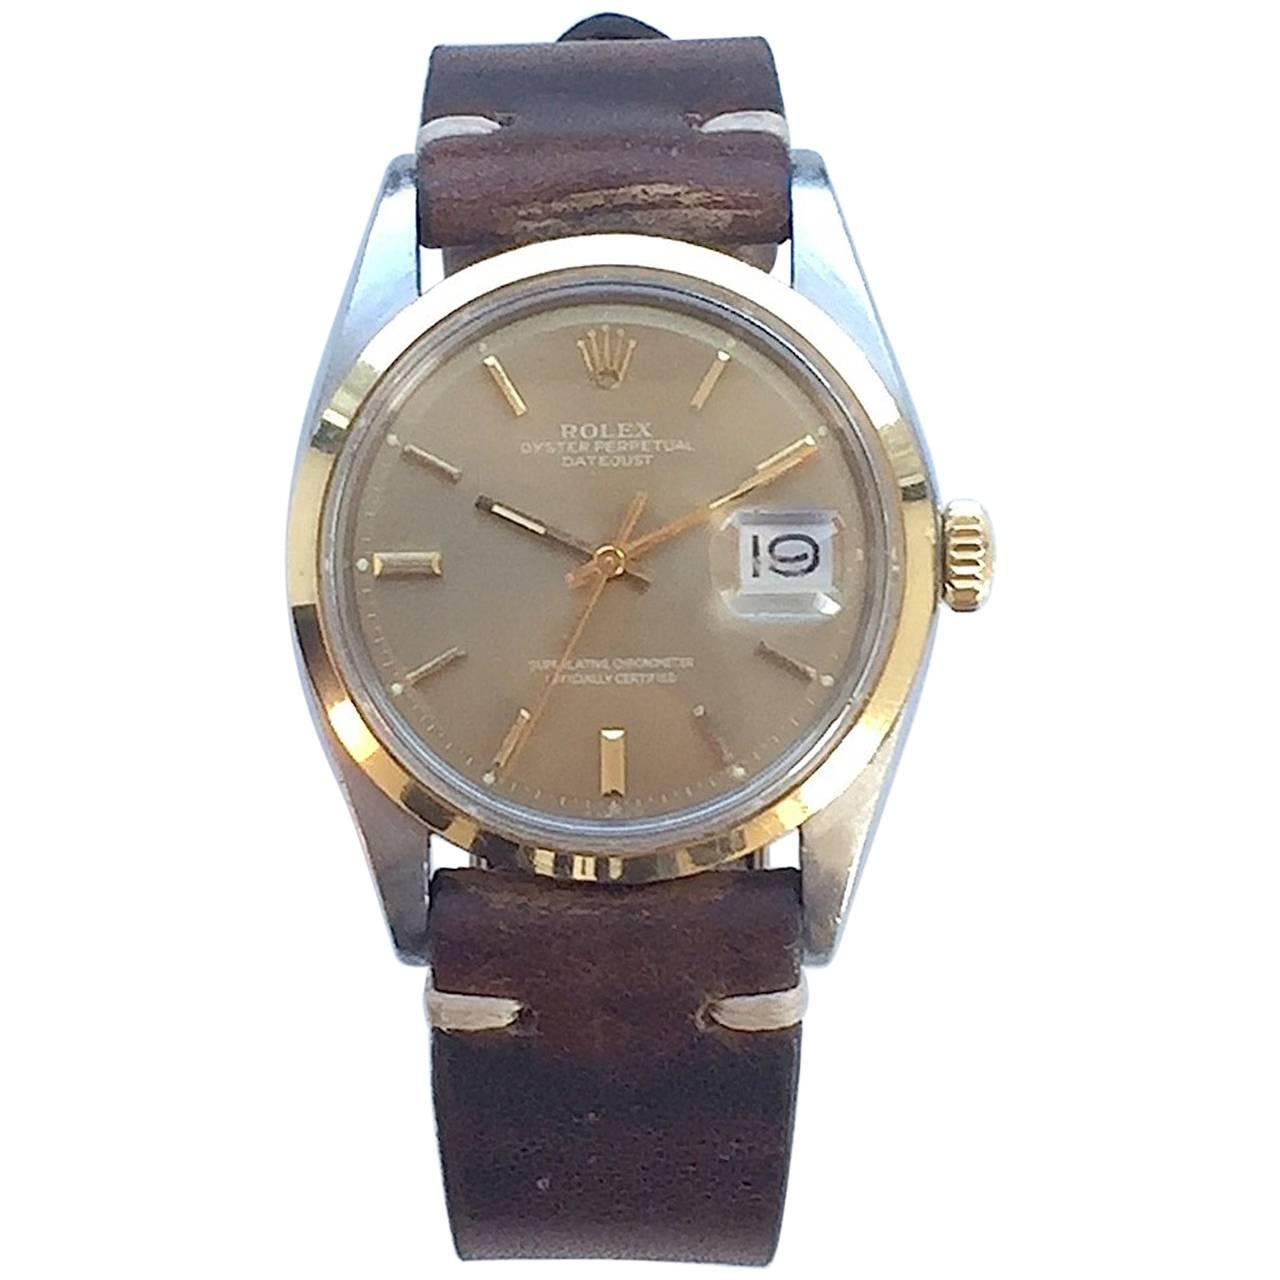 Rolex Two-Tone Oyster Perpetual Datejust Automatic Watch, 1970s